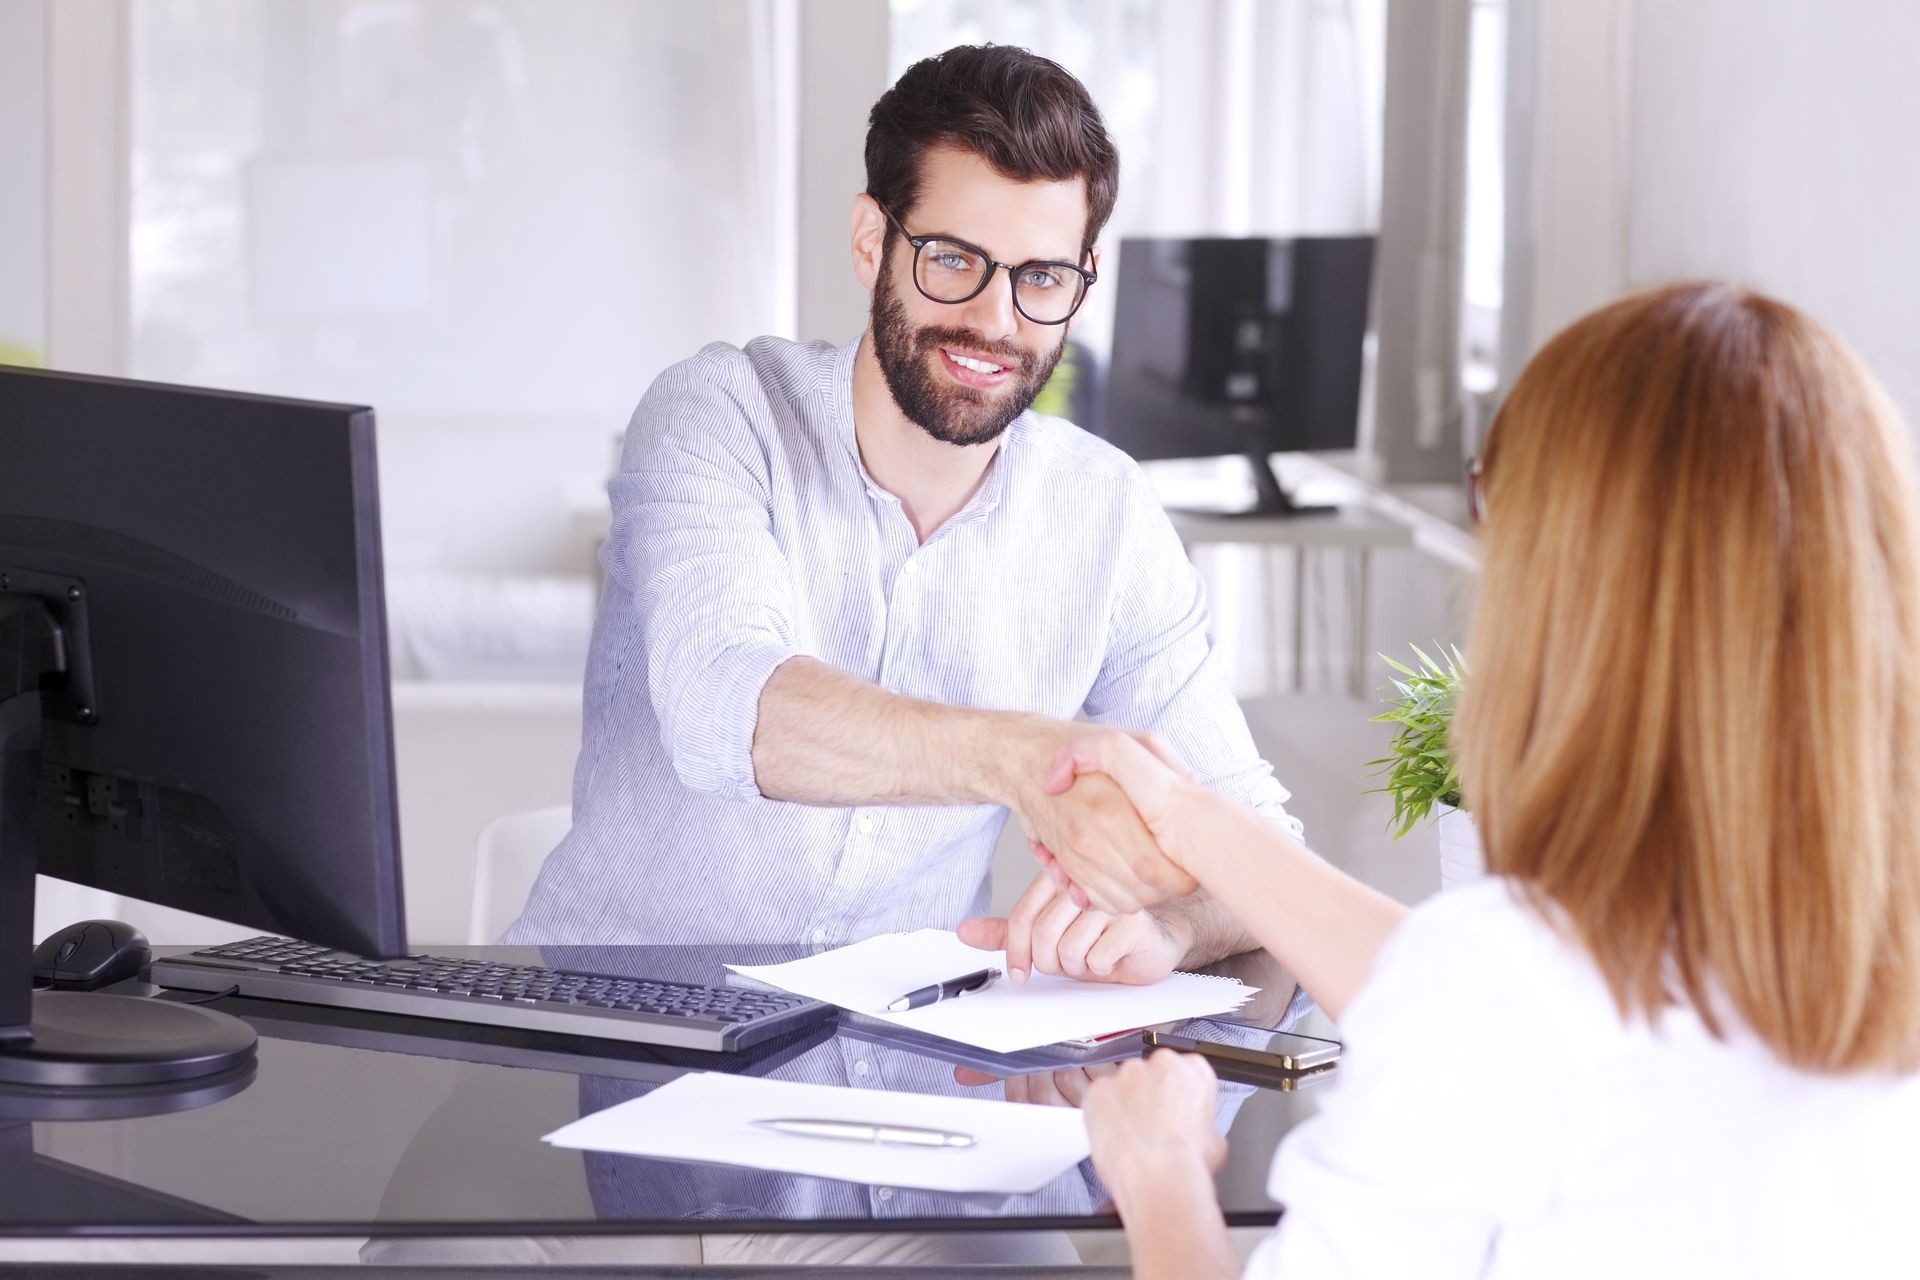 business people shaking hands while sitting in front of computer and working together OWC business relationships